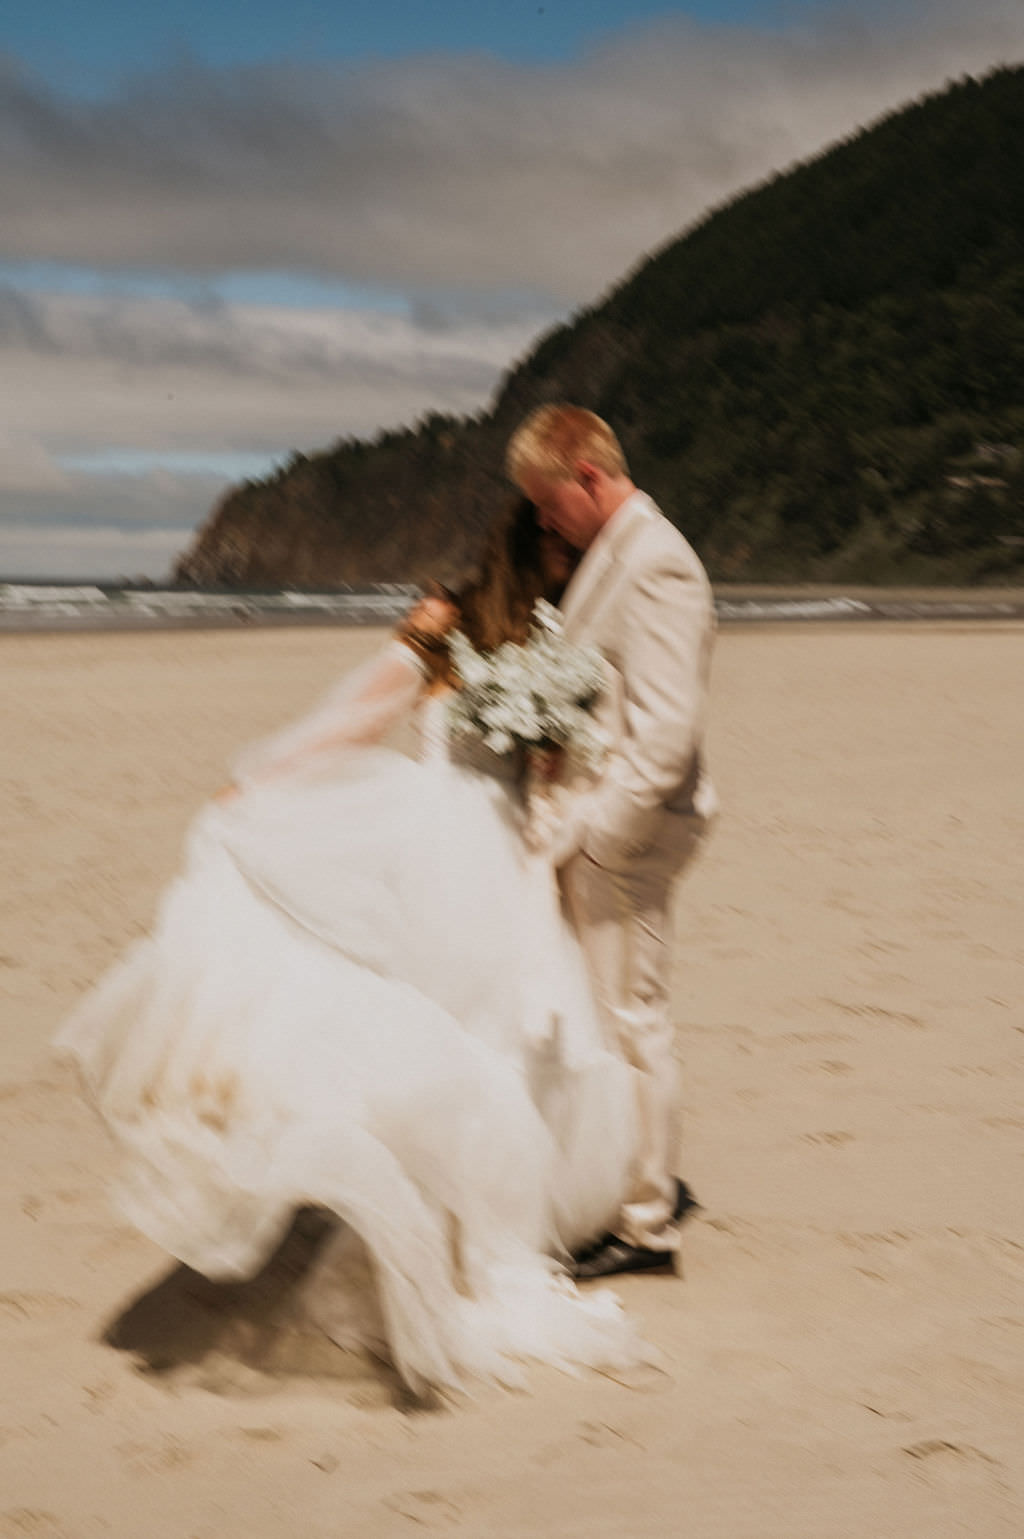 Bride and Groom during their intimate beach elopement.